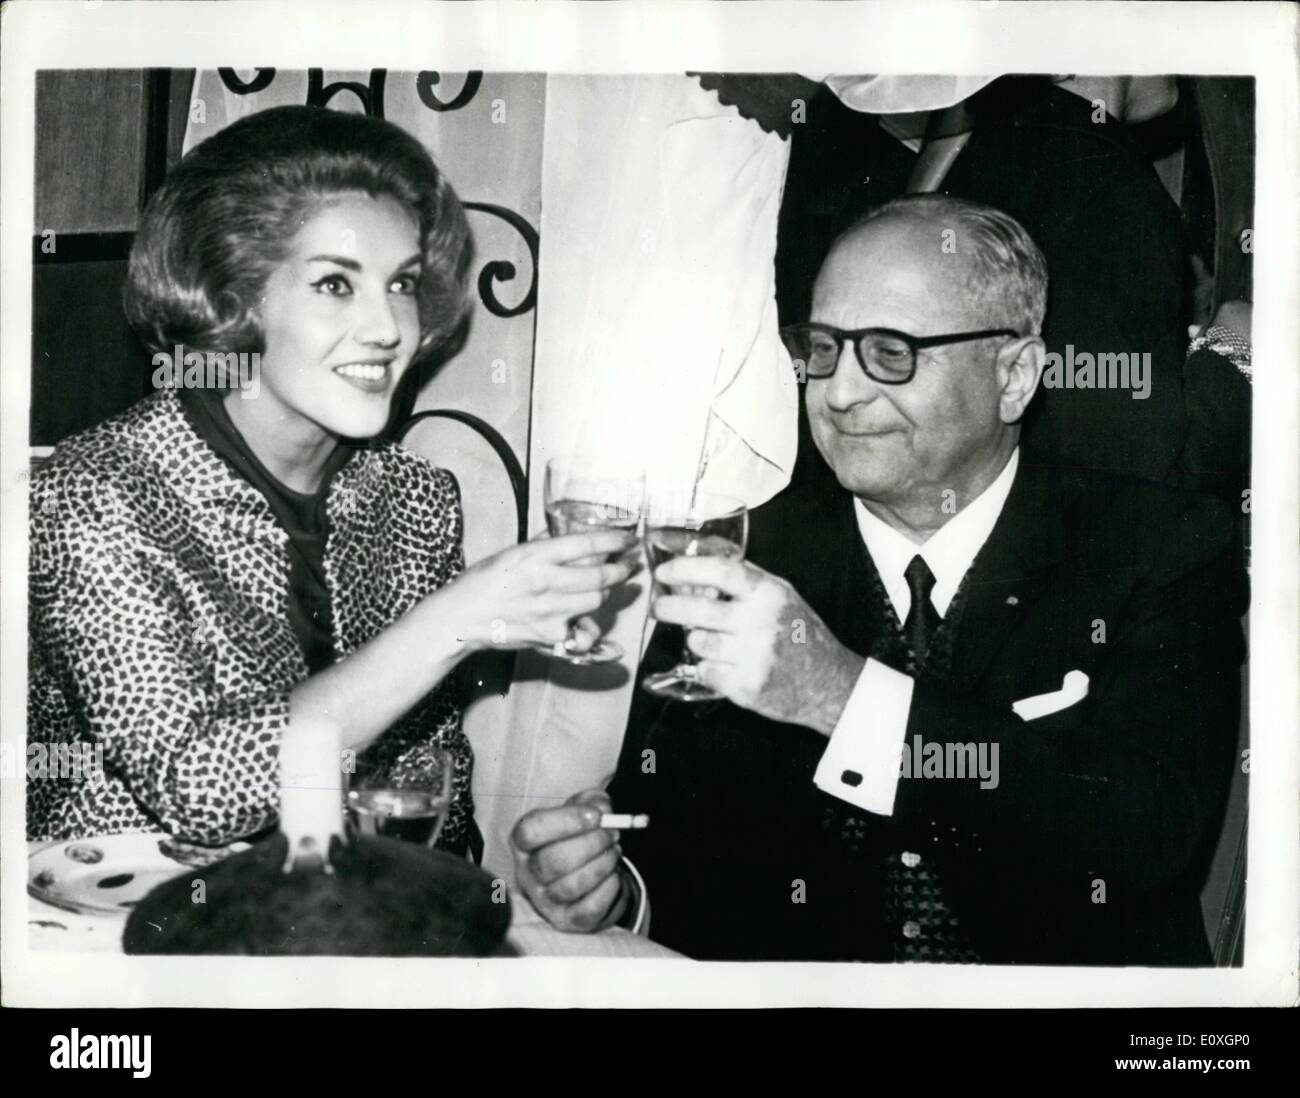 Oct. 10, 1966 - Baron James De Roths Child Weds Theater Usherette.: 72 years old Baron James de Roths Child today married 28 years old theater usherette, Yvette Choquet, in Paris. Photo shows the couple toasting after today's civil wedding in Paris. Stock Photo